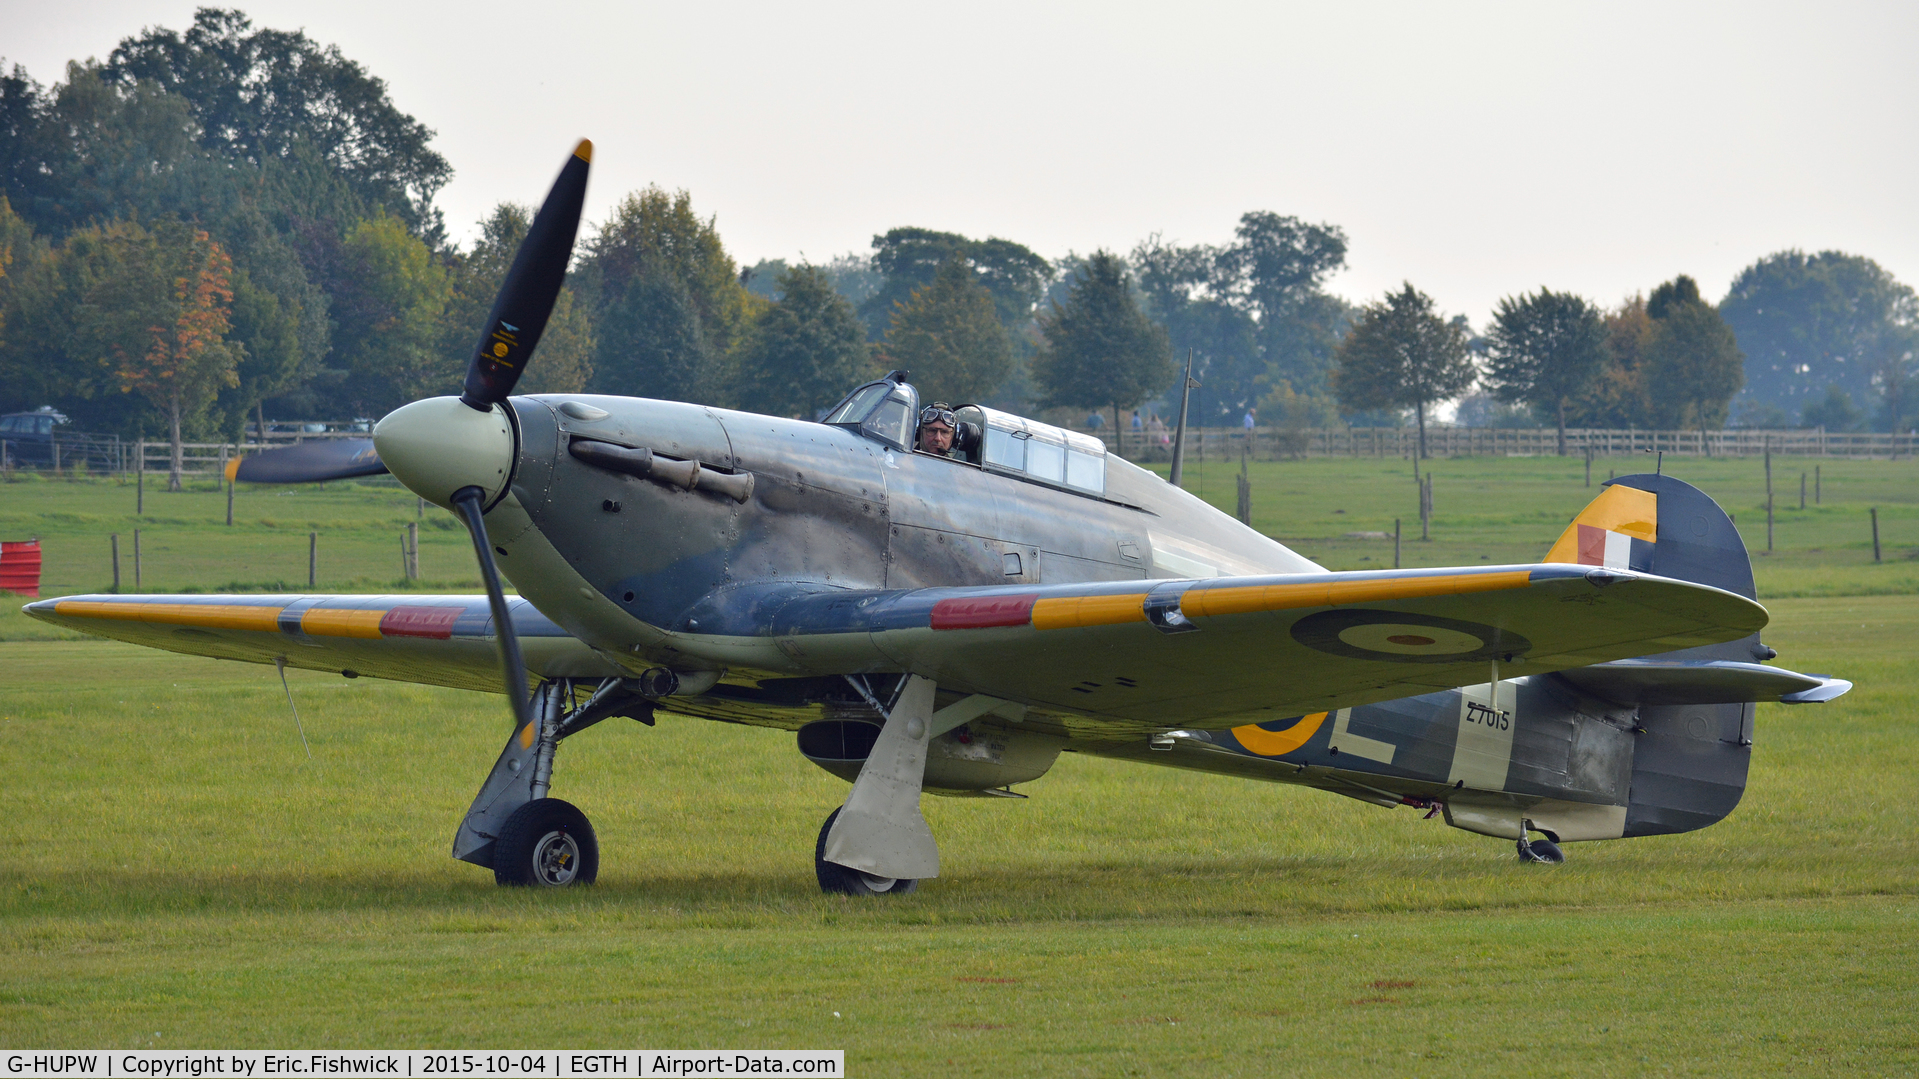 G-HUPW, 1940 Hawker Hurricane I C/N G592301, 3. R4118 at The Shuttleworth 'Uncovered' Airshow (Finale,) Oct. 2015.